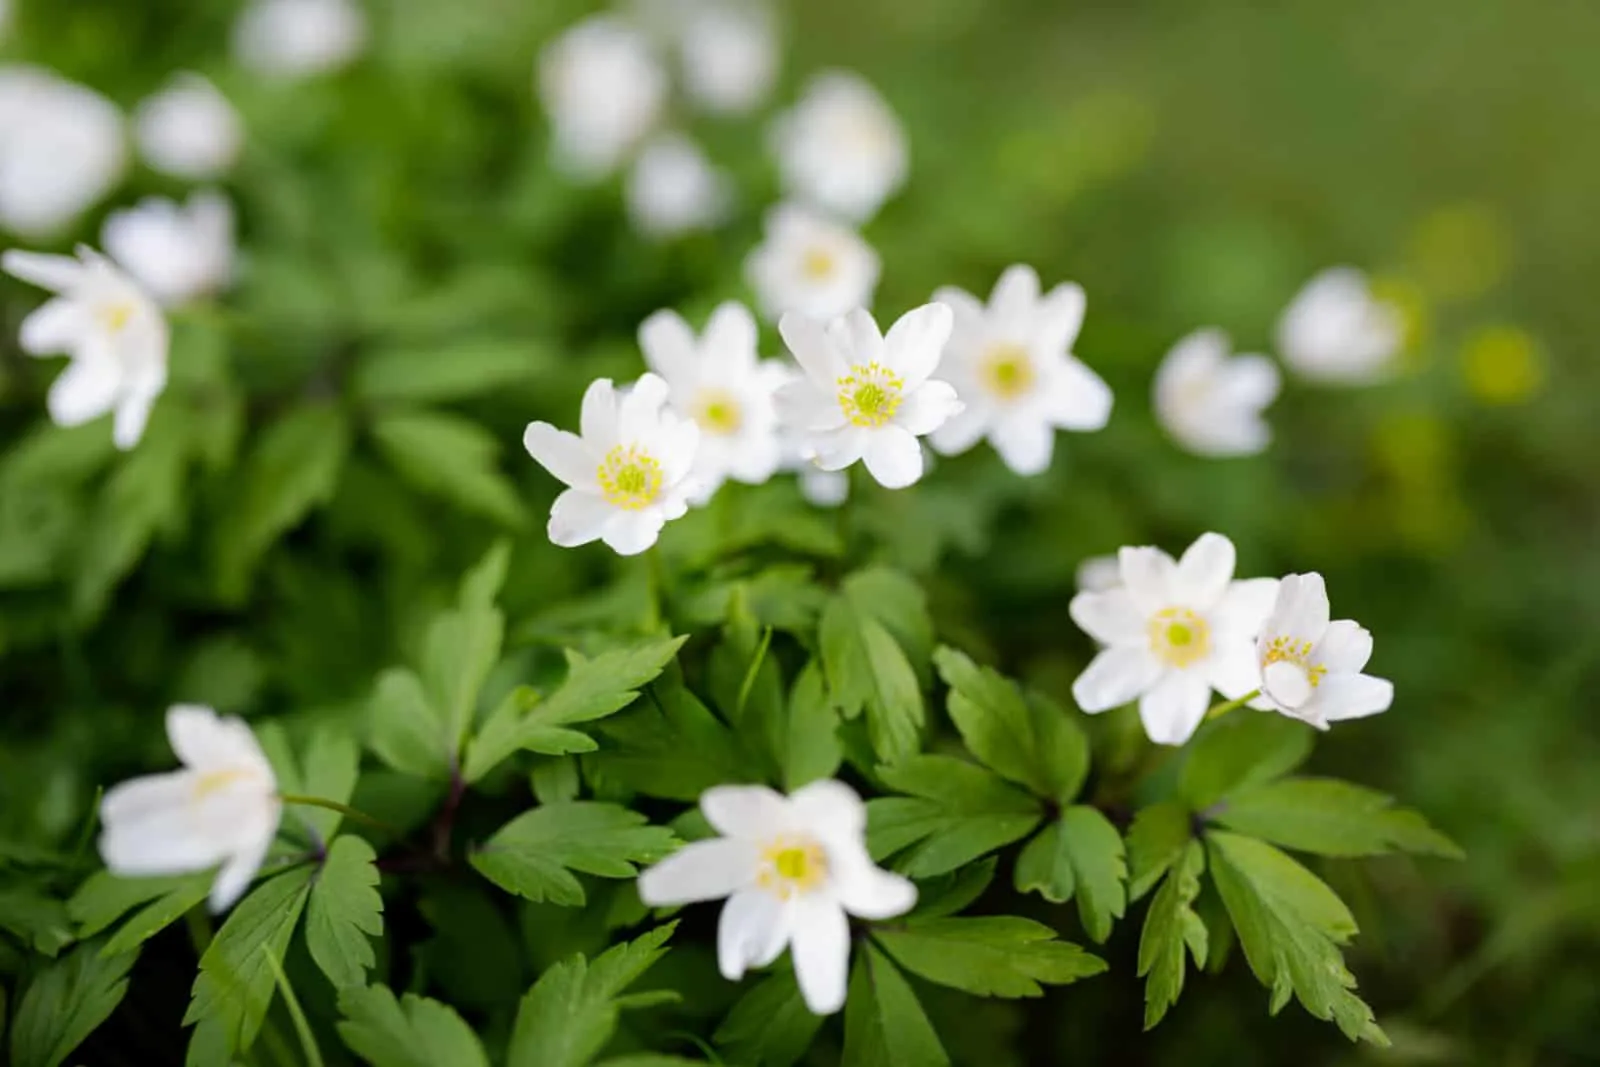 Beautiful anemone nemorosa flower blooming outdoors at spring day